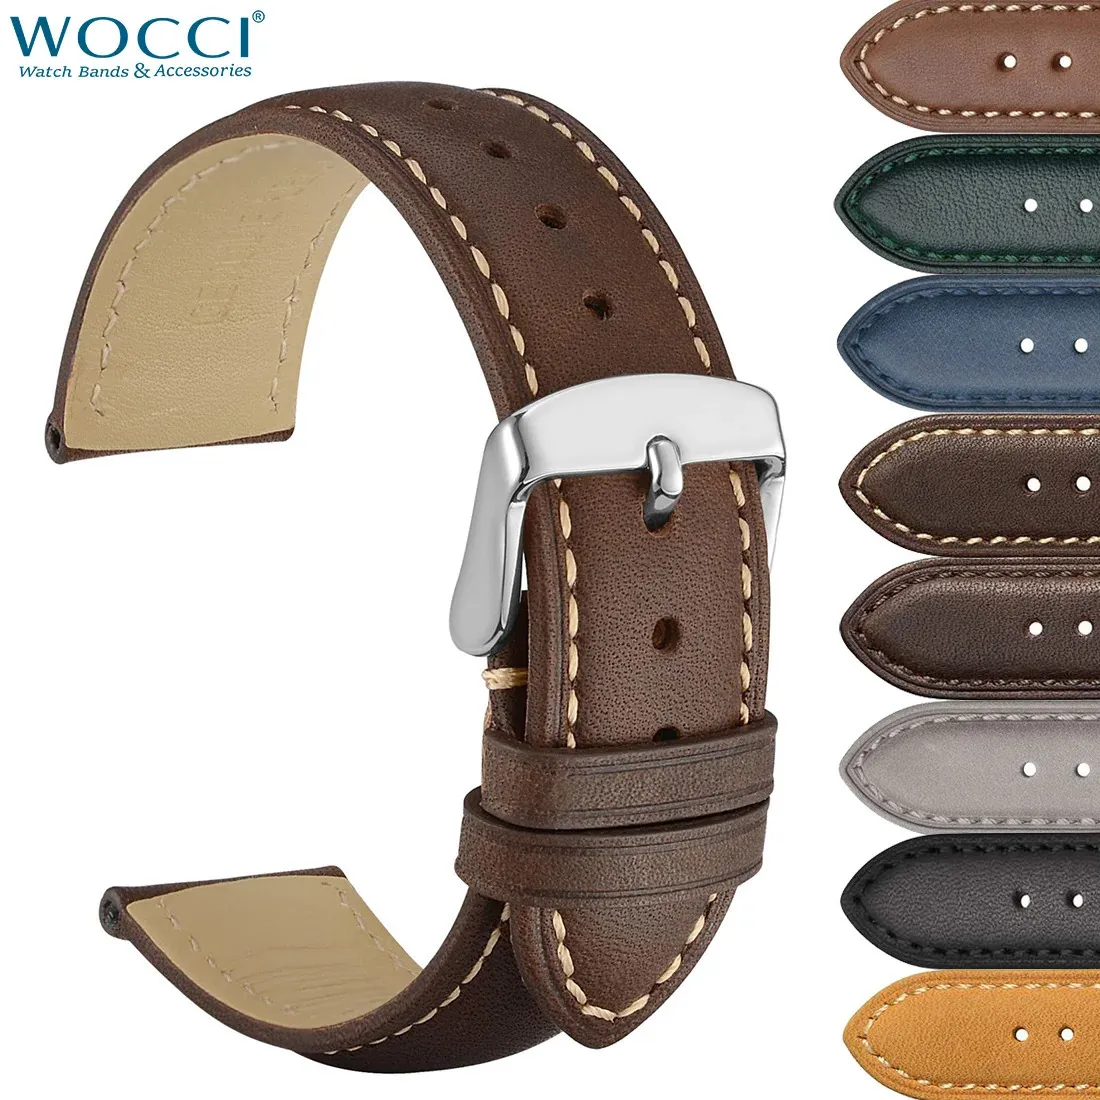 WOCCI Genuine Leather Watch Strap 14mm 16mm 18mm 19mm 20mm 21mm 22mm 23mm 24mm Replacement Bands Bracelet for Men Women 240408